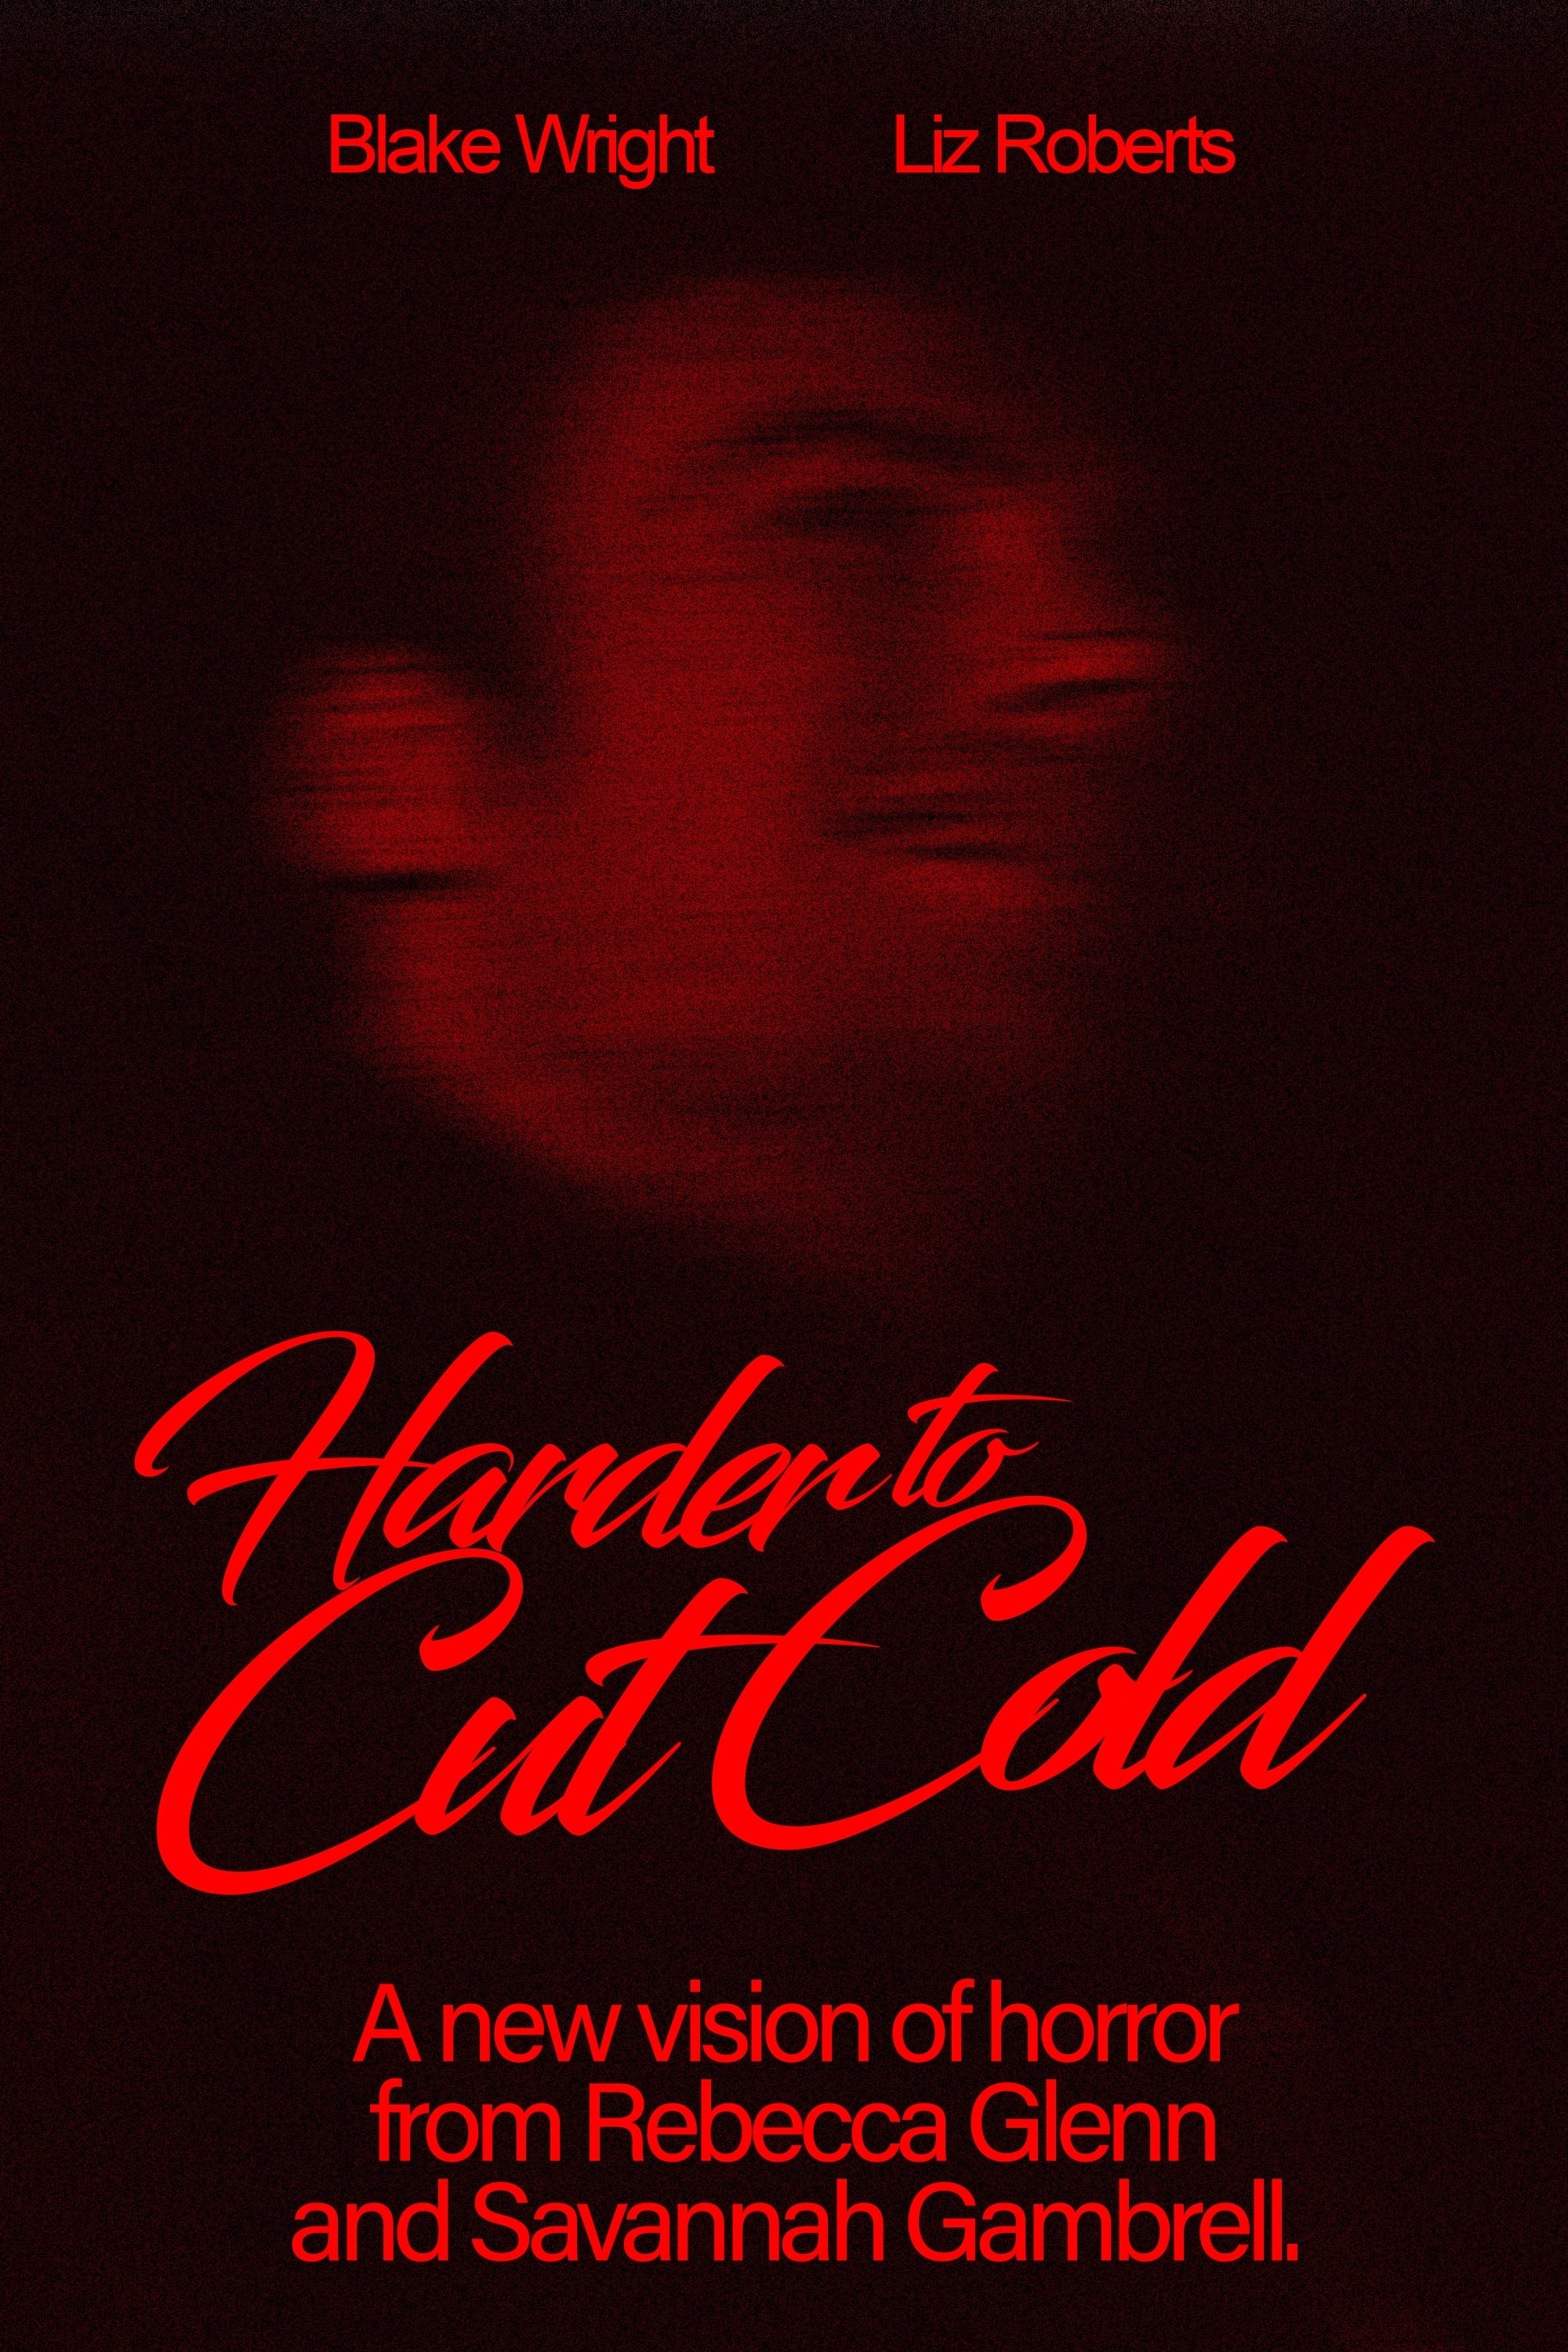 Harder to Cut Cold